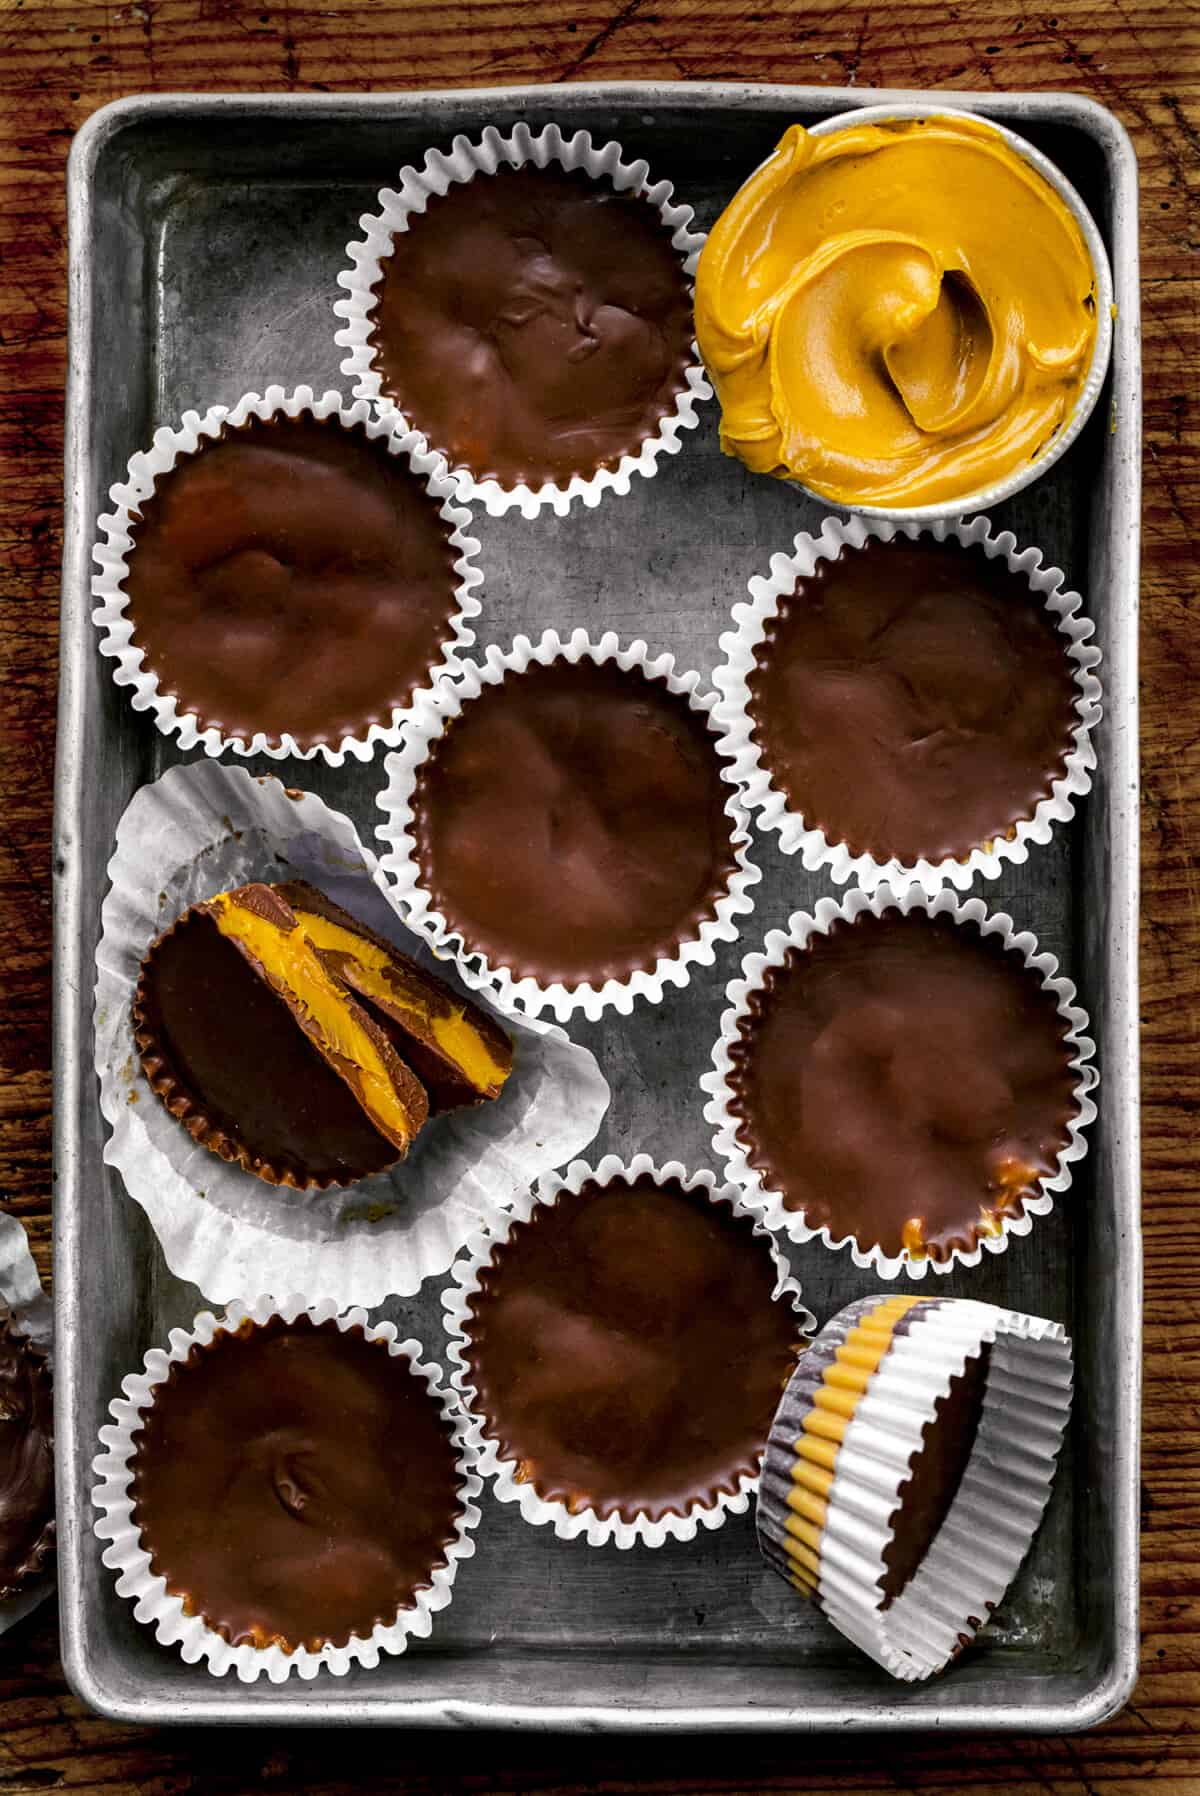 Homemade Peanut Butter Cups in a Pan with Some Extra Peanut Butter and One Cut in Half.